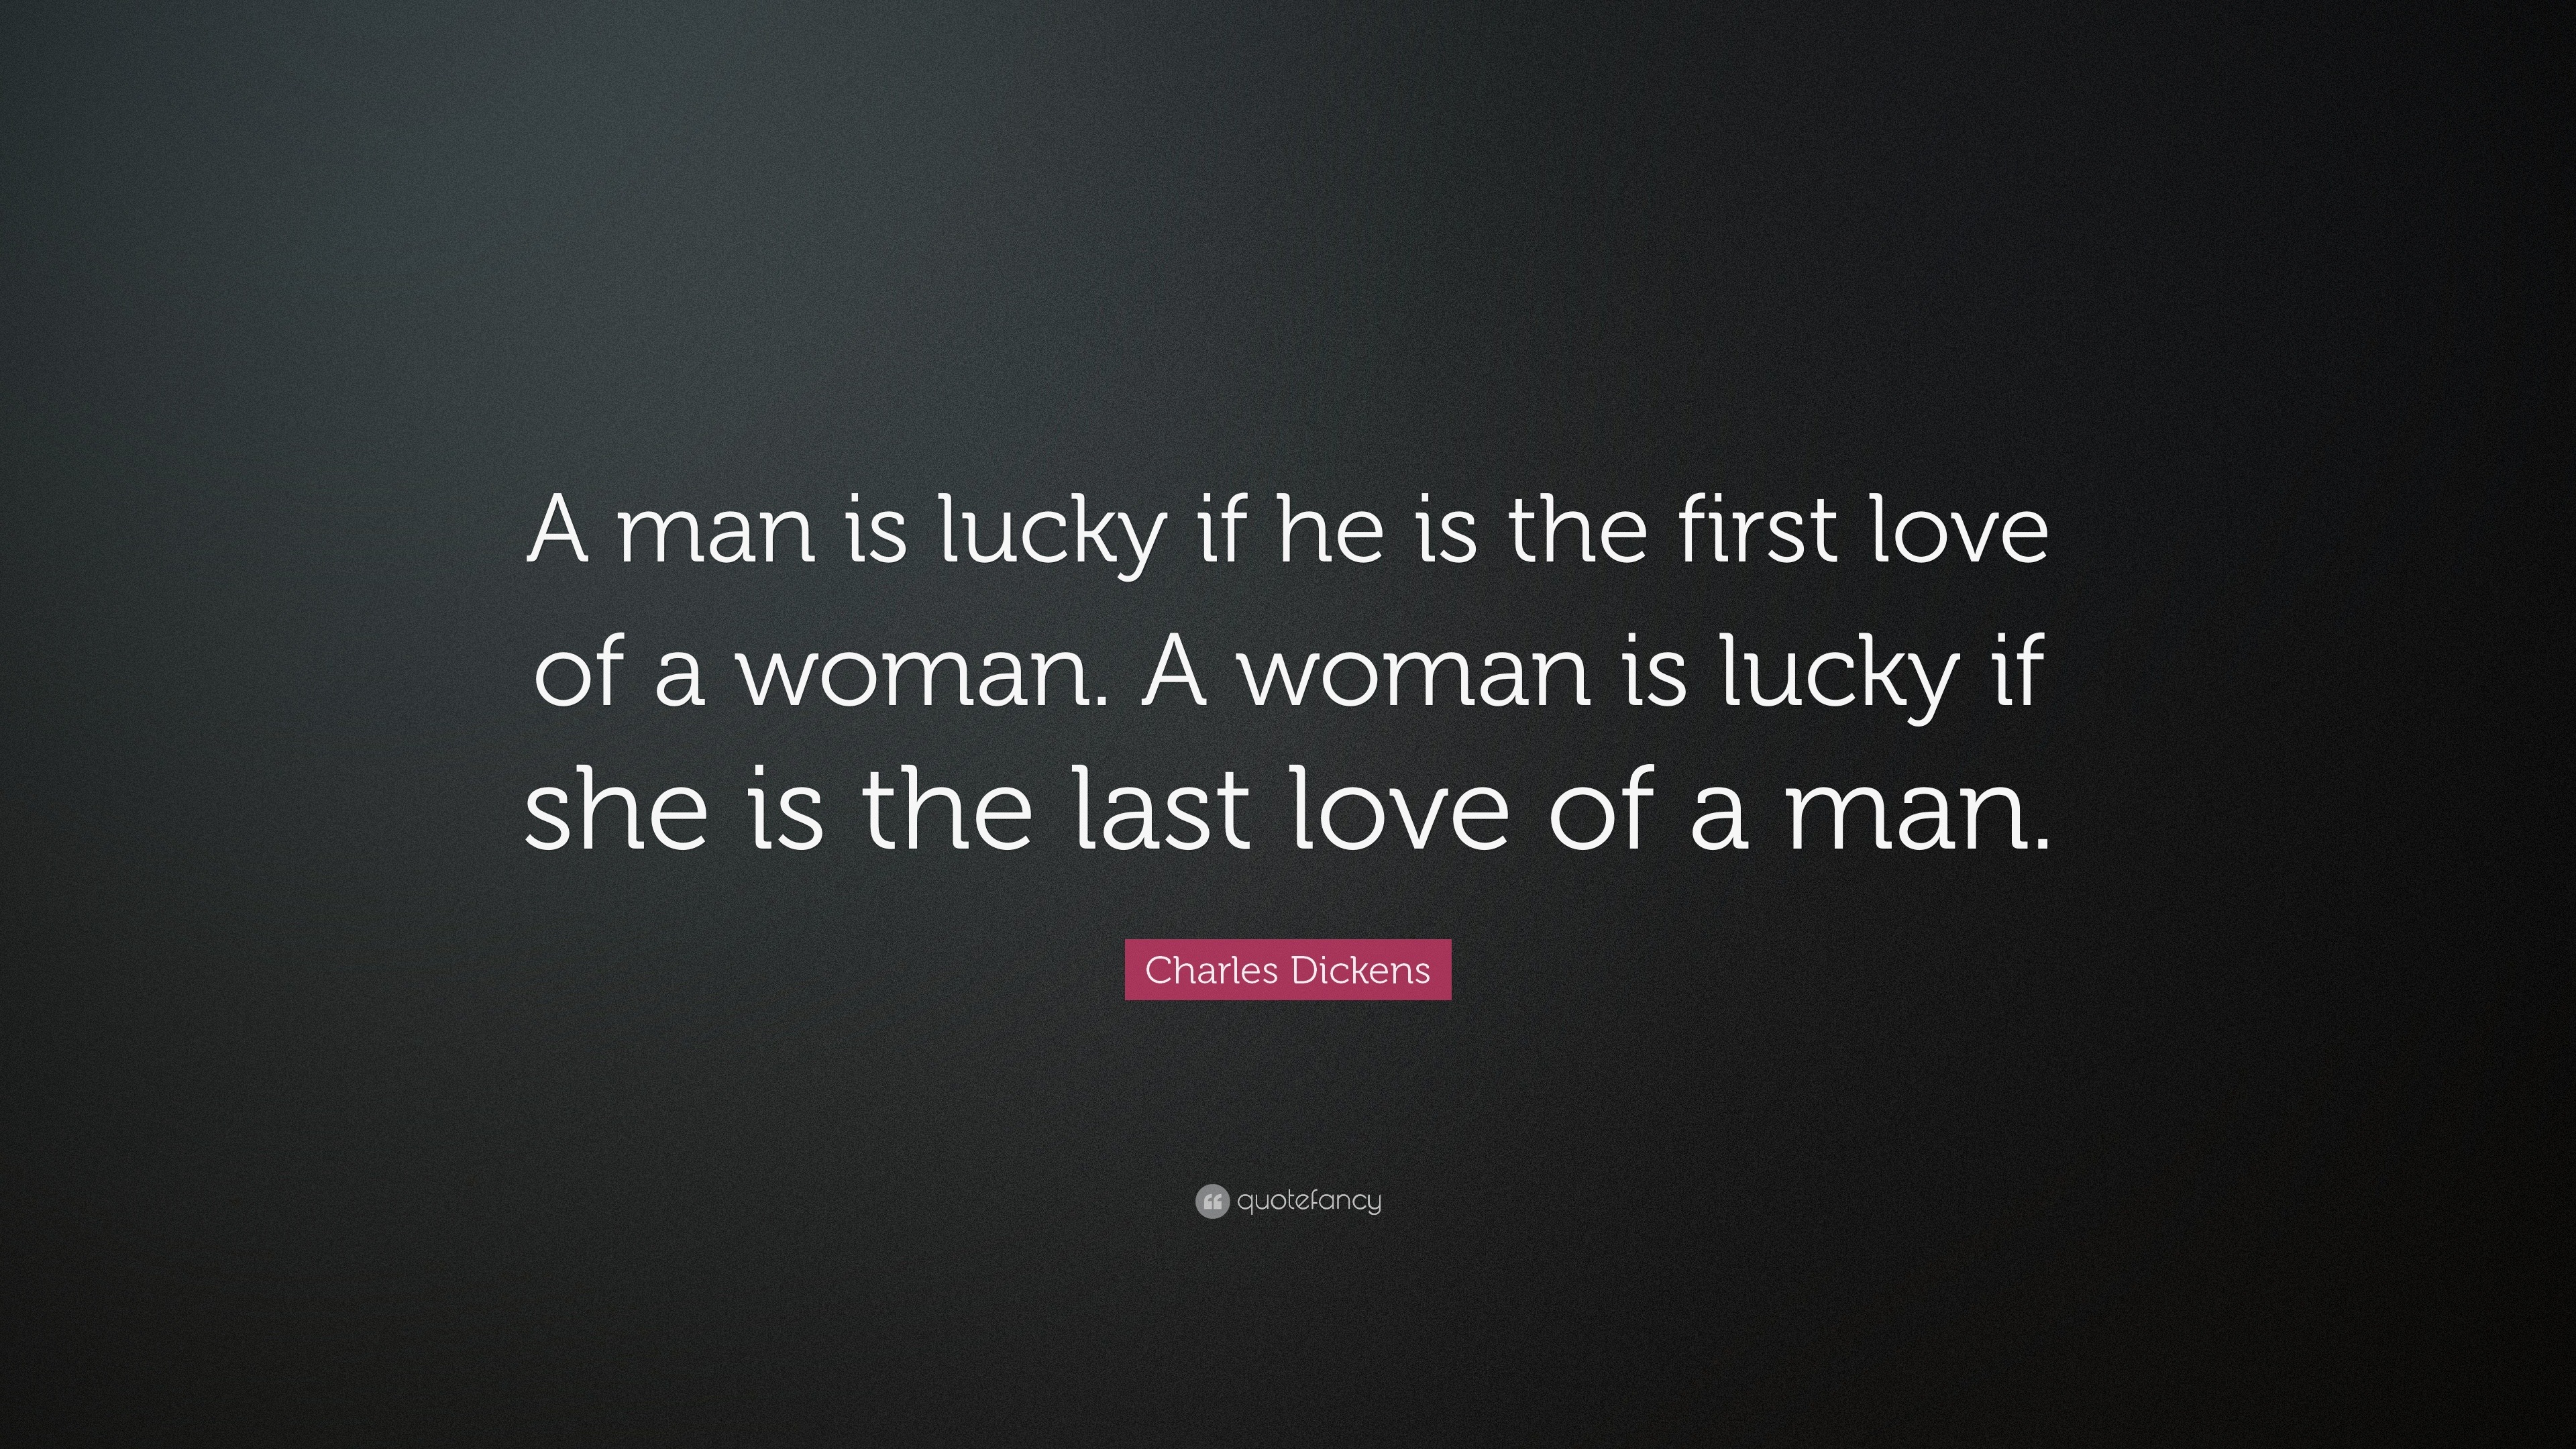 Charles Dickens Quote “A man is lucky if he is the first love of